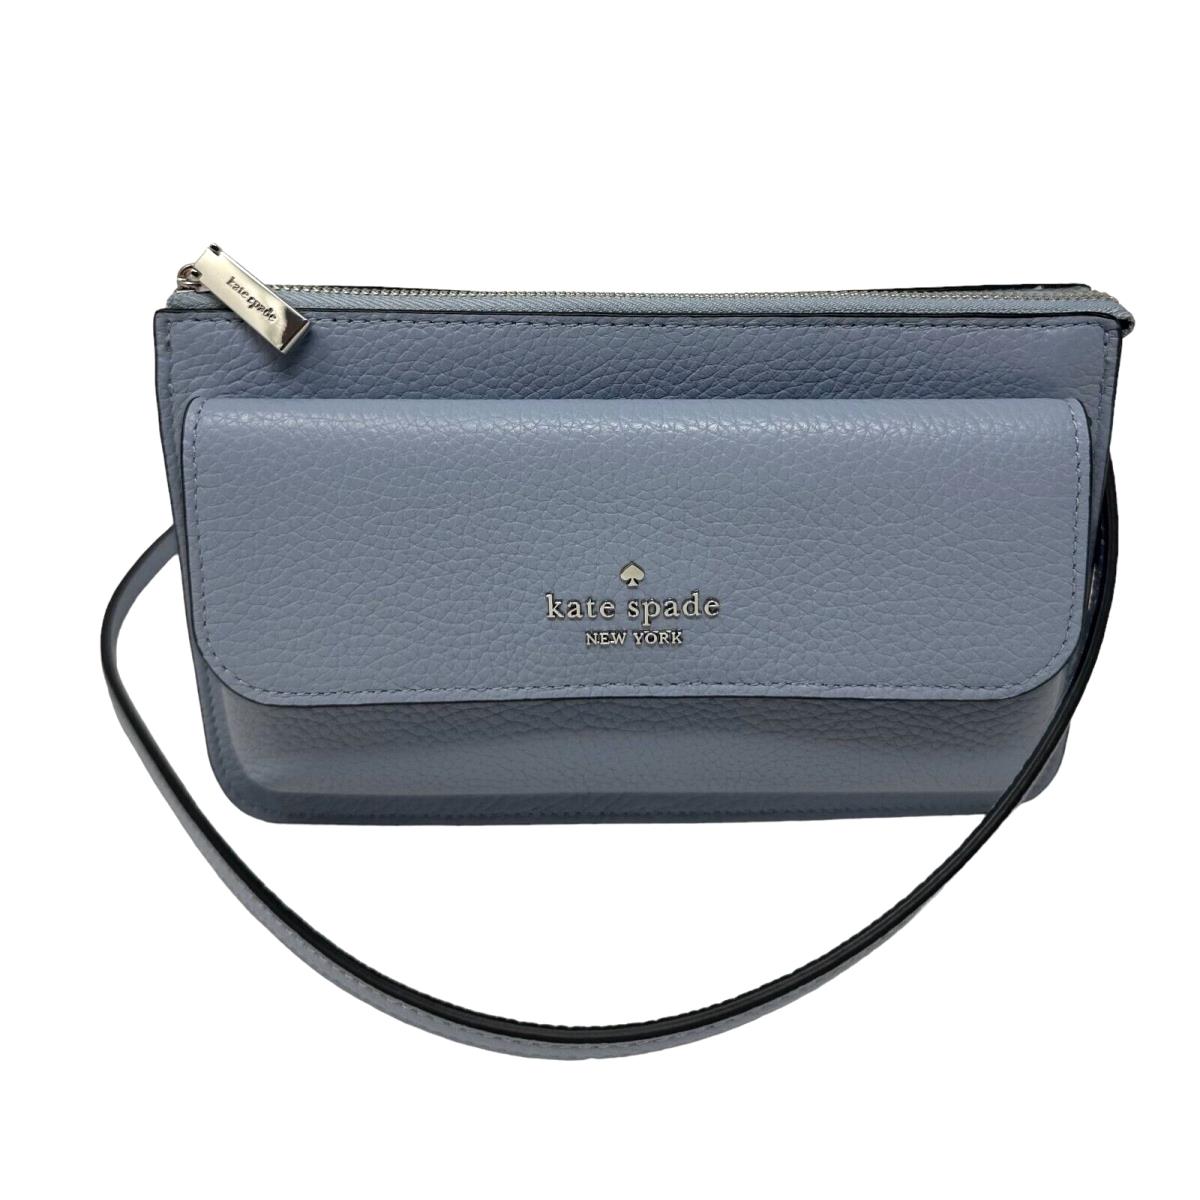 Kate Spade Leila Small Flap Pebbled Leather Crossbody Bag Muted Blue K8284